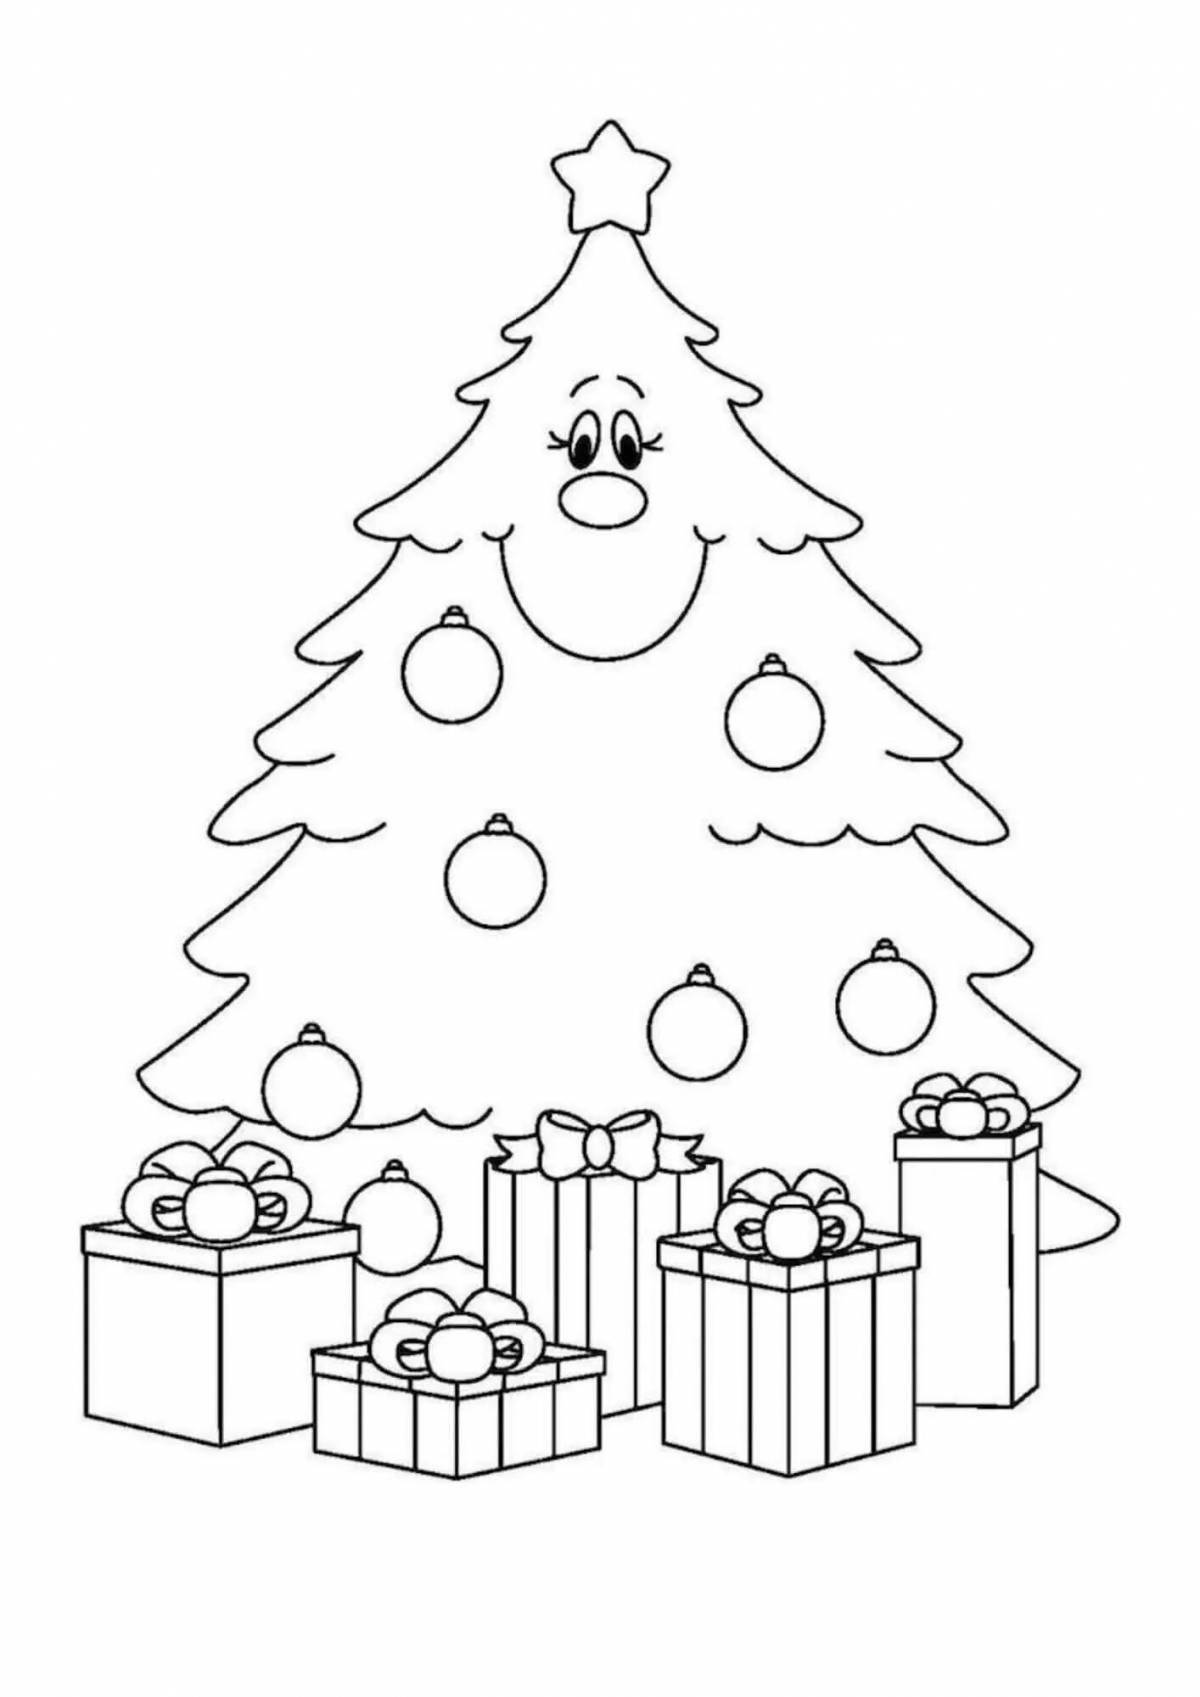 Live coloring small tree